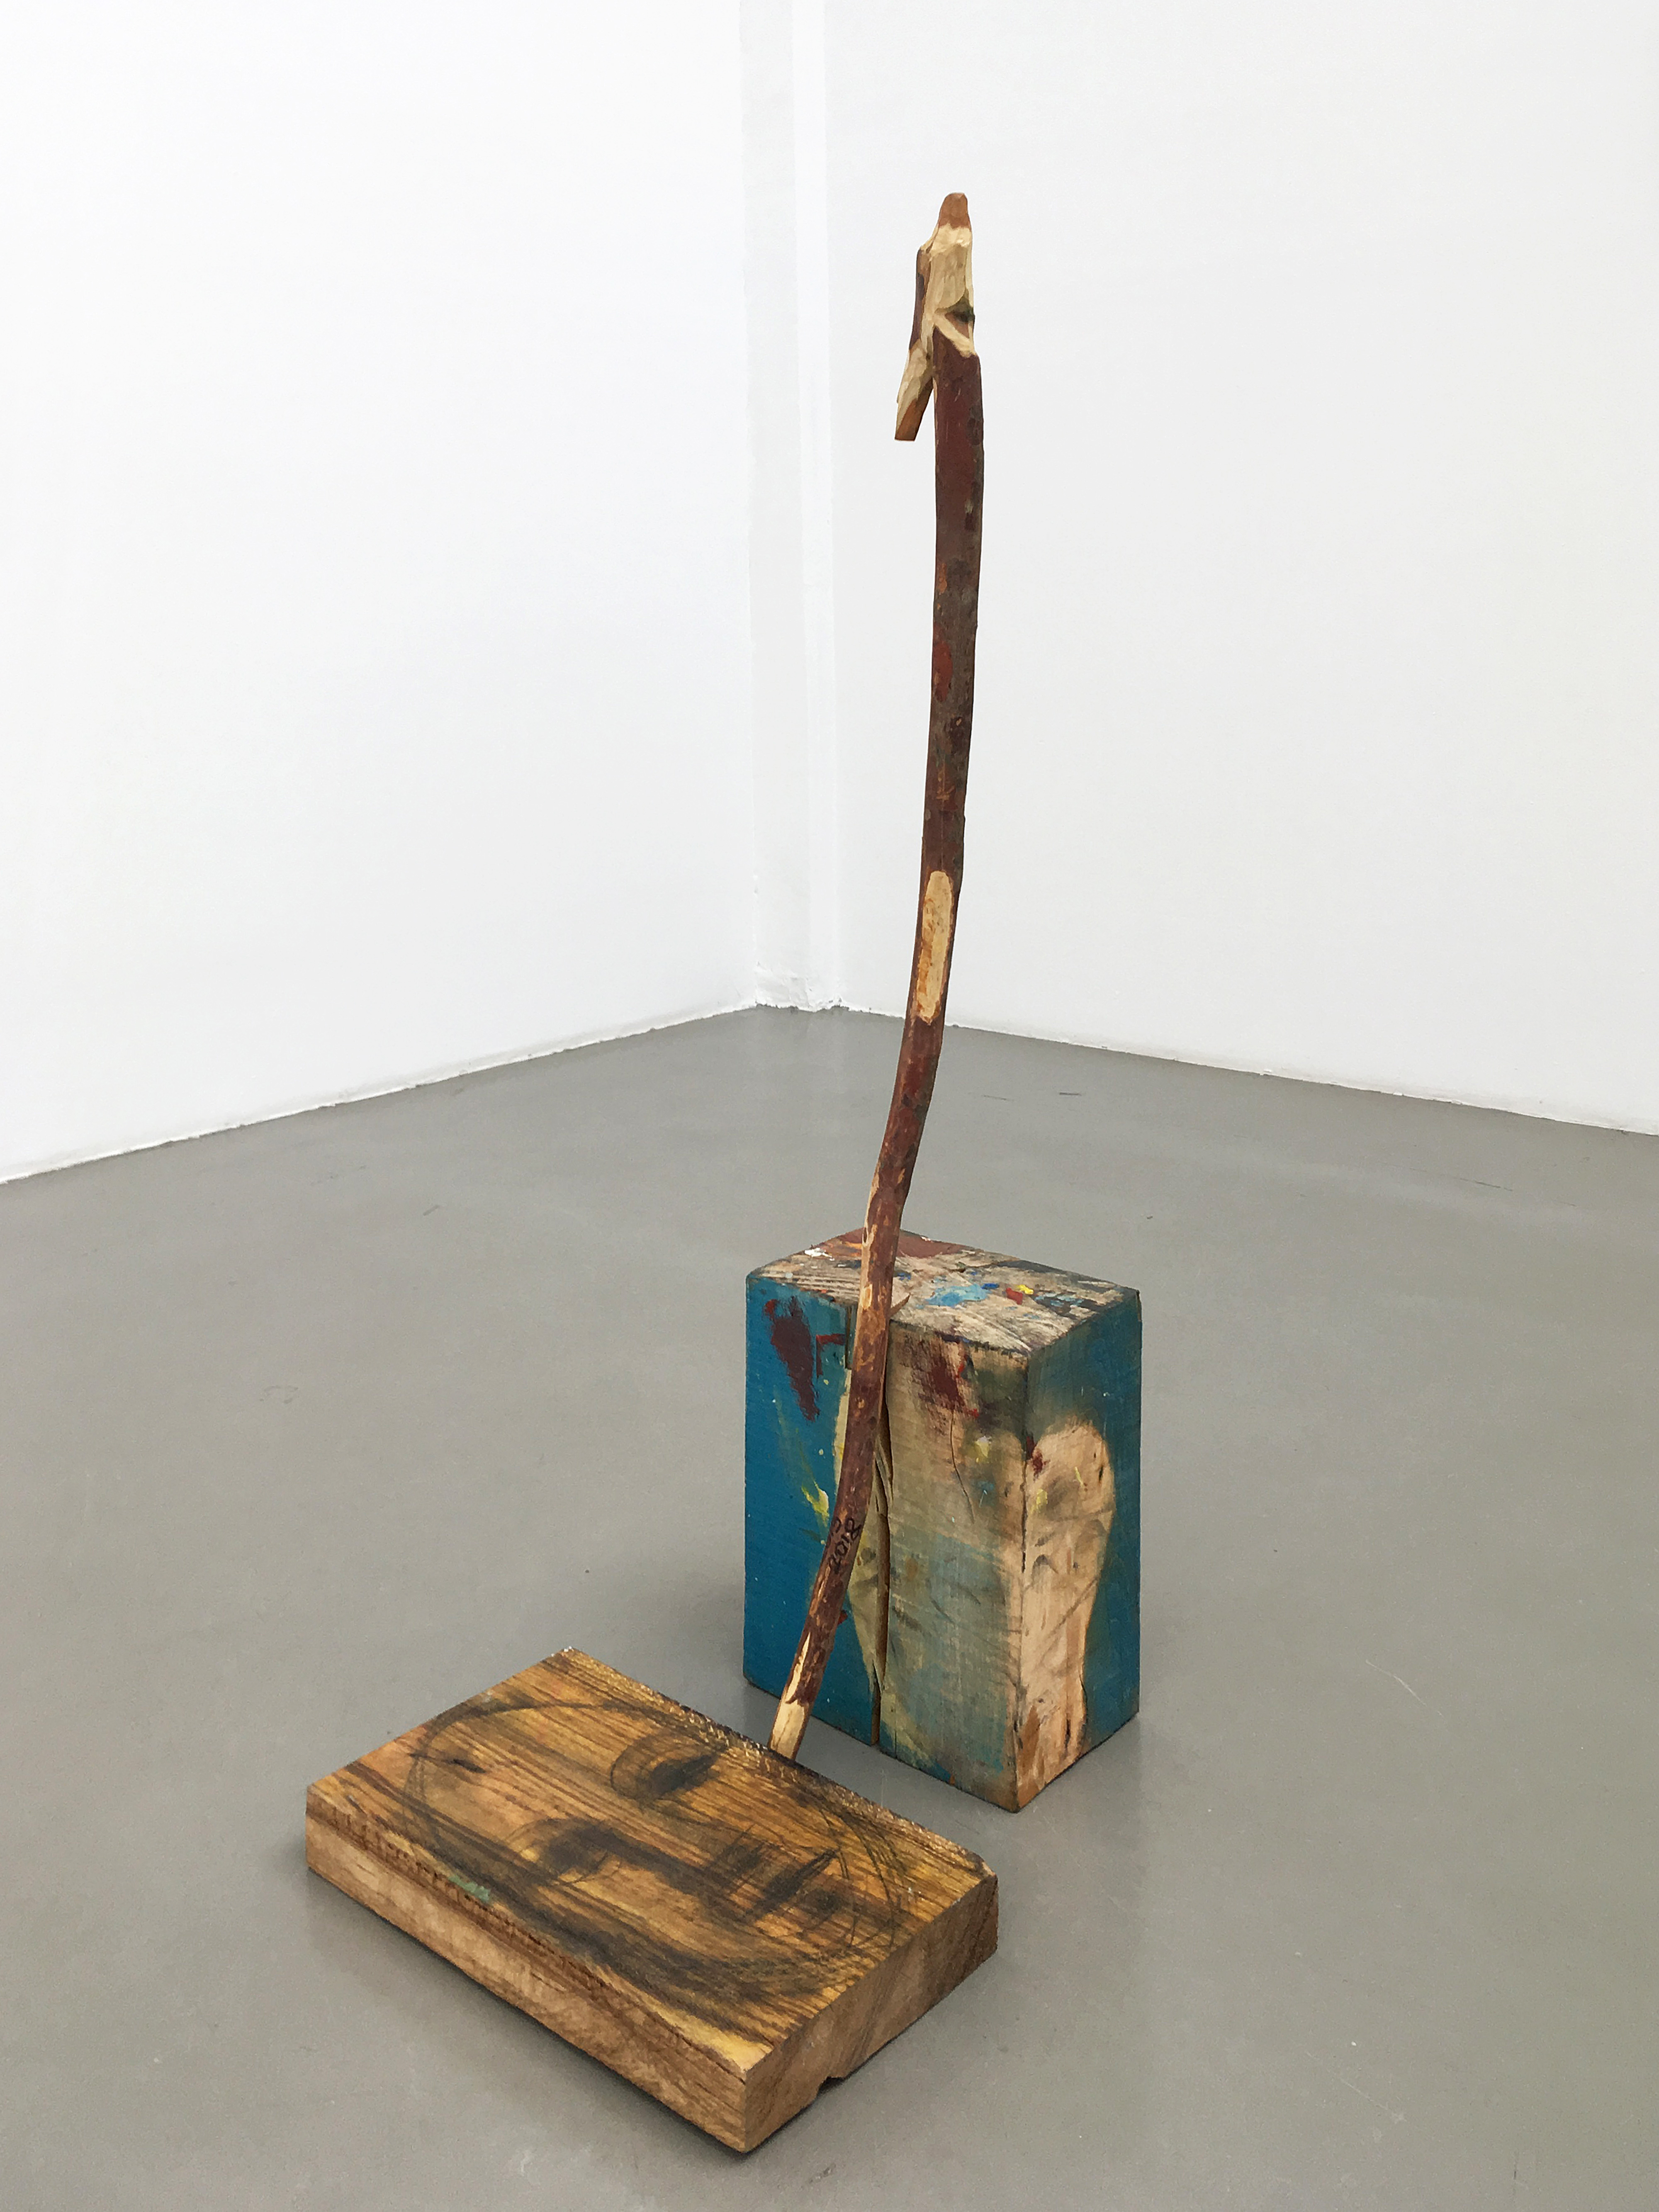 Galerie Barbara Thumm \ Simon Cantemir Hausì: Untitled (Walking Stick, Cube and Plake) (Sca-18-036) \ Untitled (Walking Stick, Cube and Plake) (2018)